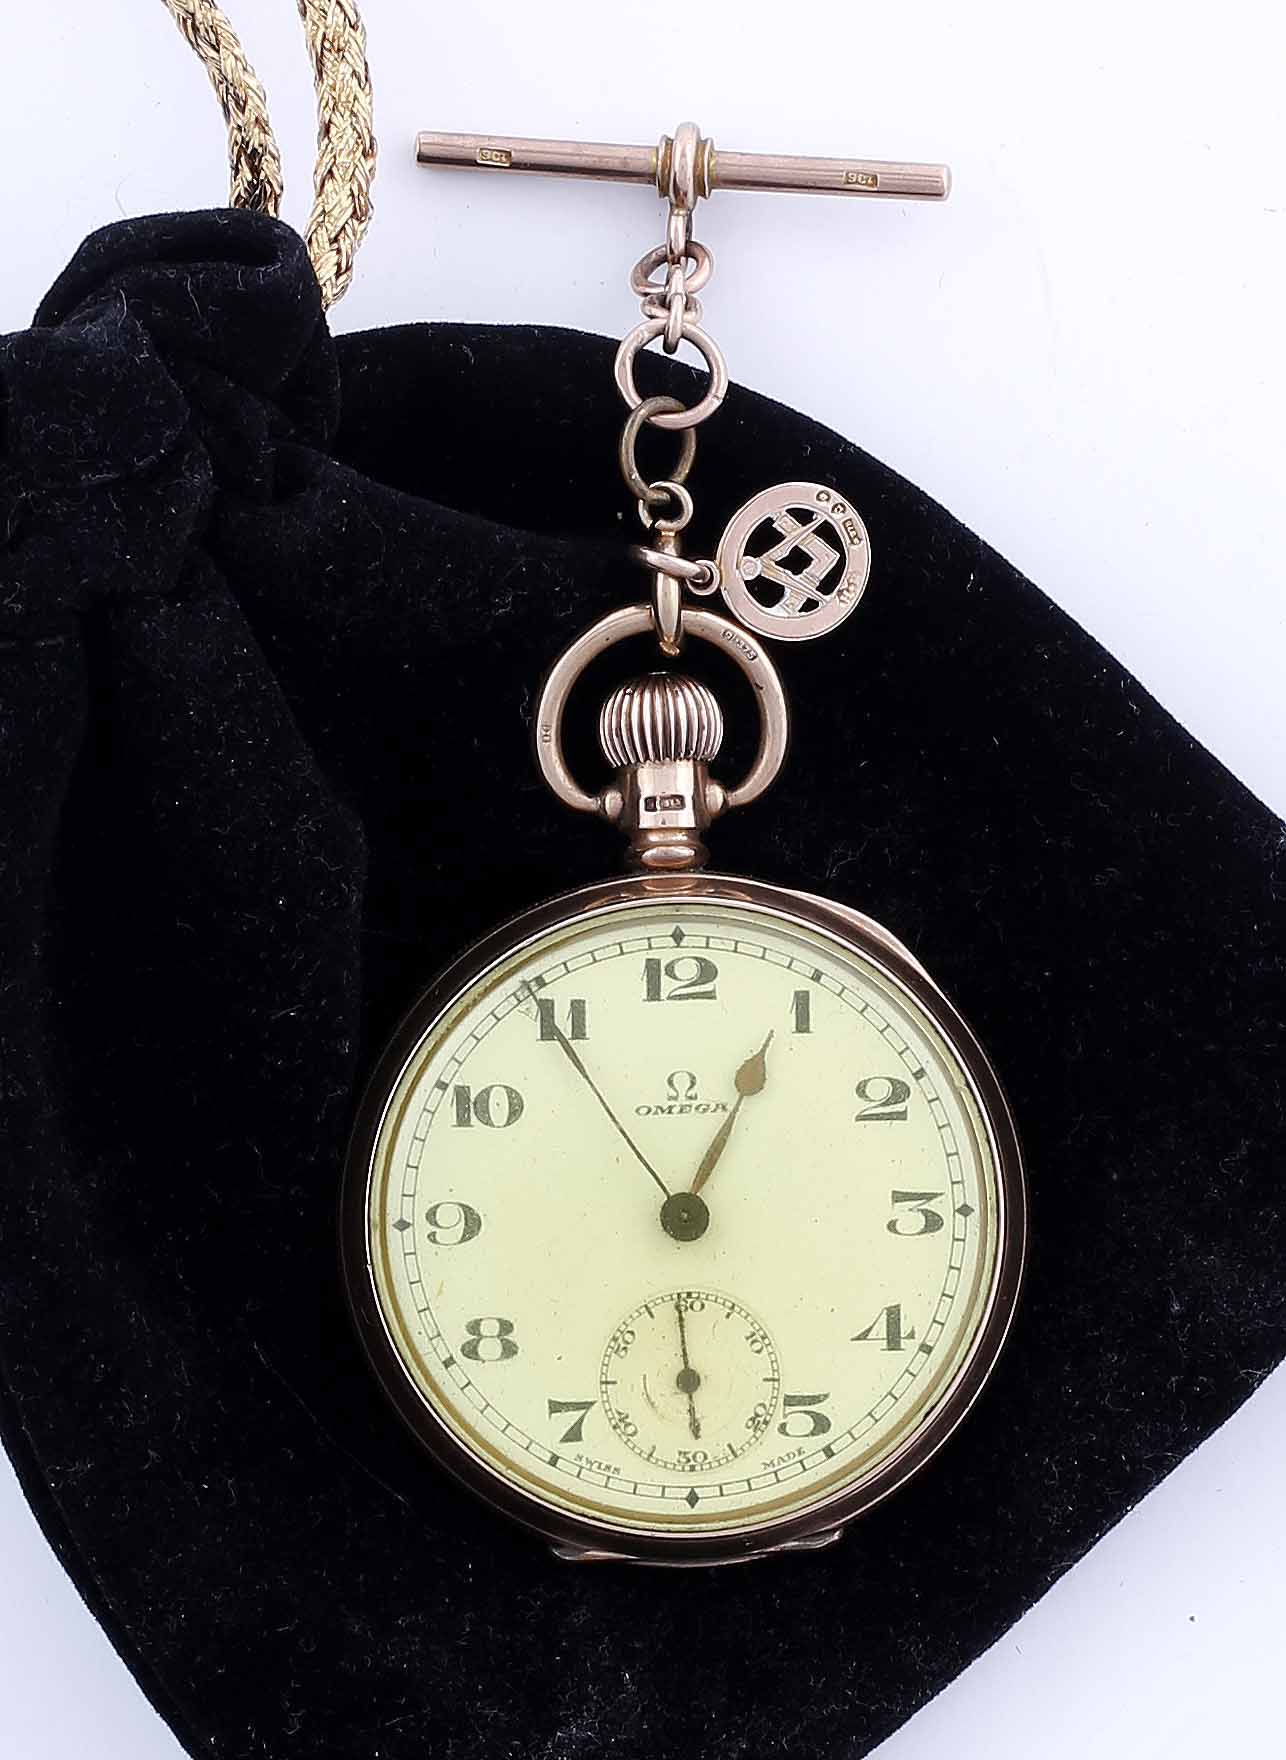 A 9 CARAT ROSE GOLD CASED OMEGA POCKET WATCH with Masonic gold talisman on the chain